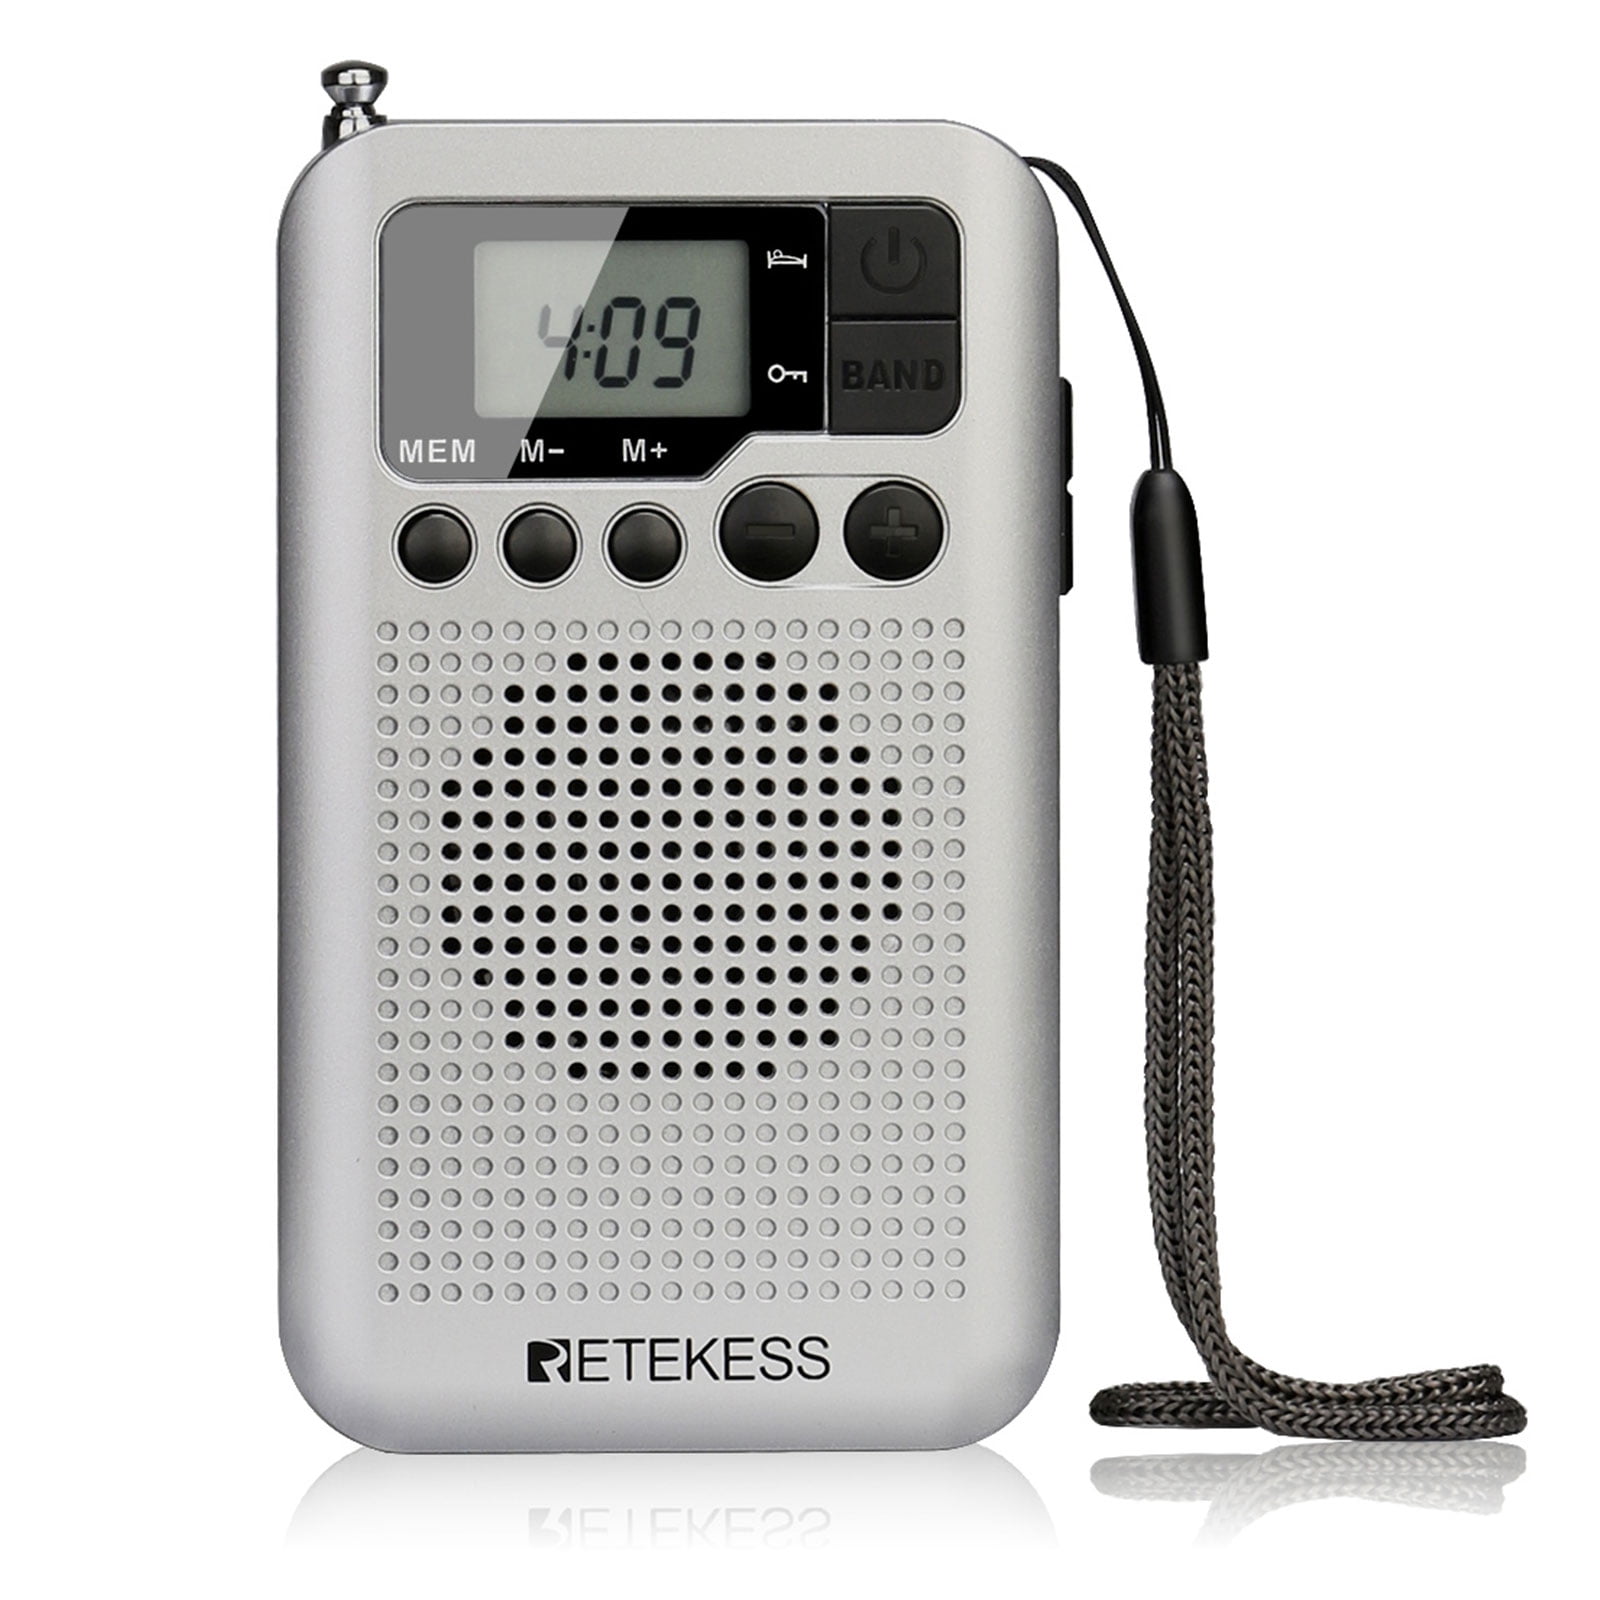 image 0 of Pocket Radio, TSV Small Portable Digital AM FM Battery Operated Radio with Built-in Speaker